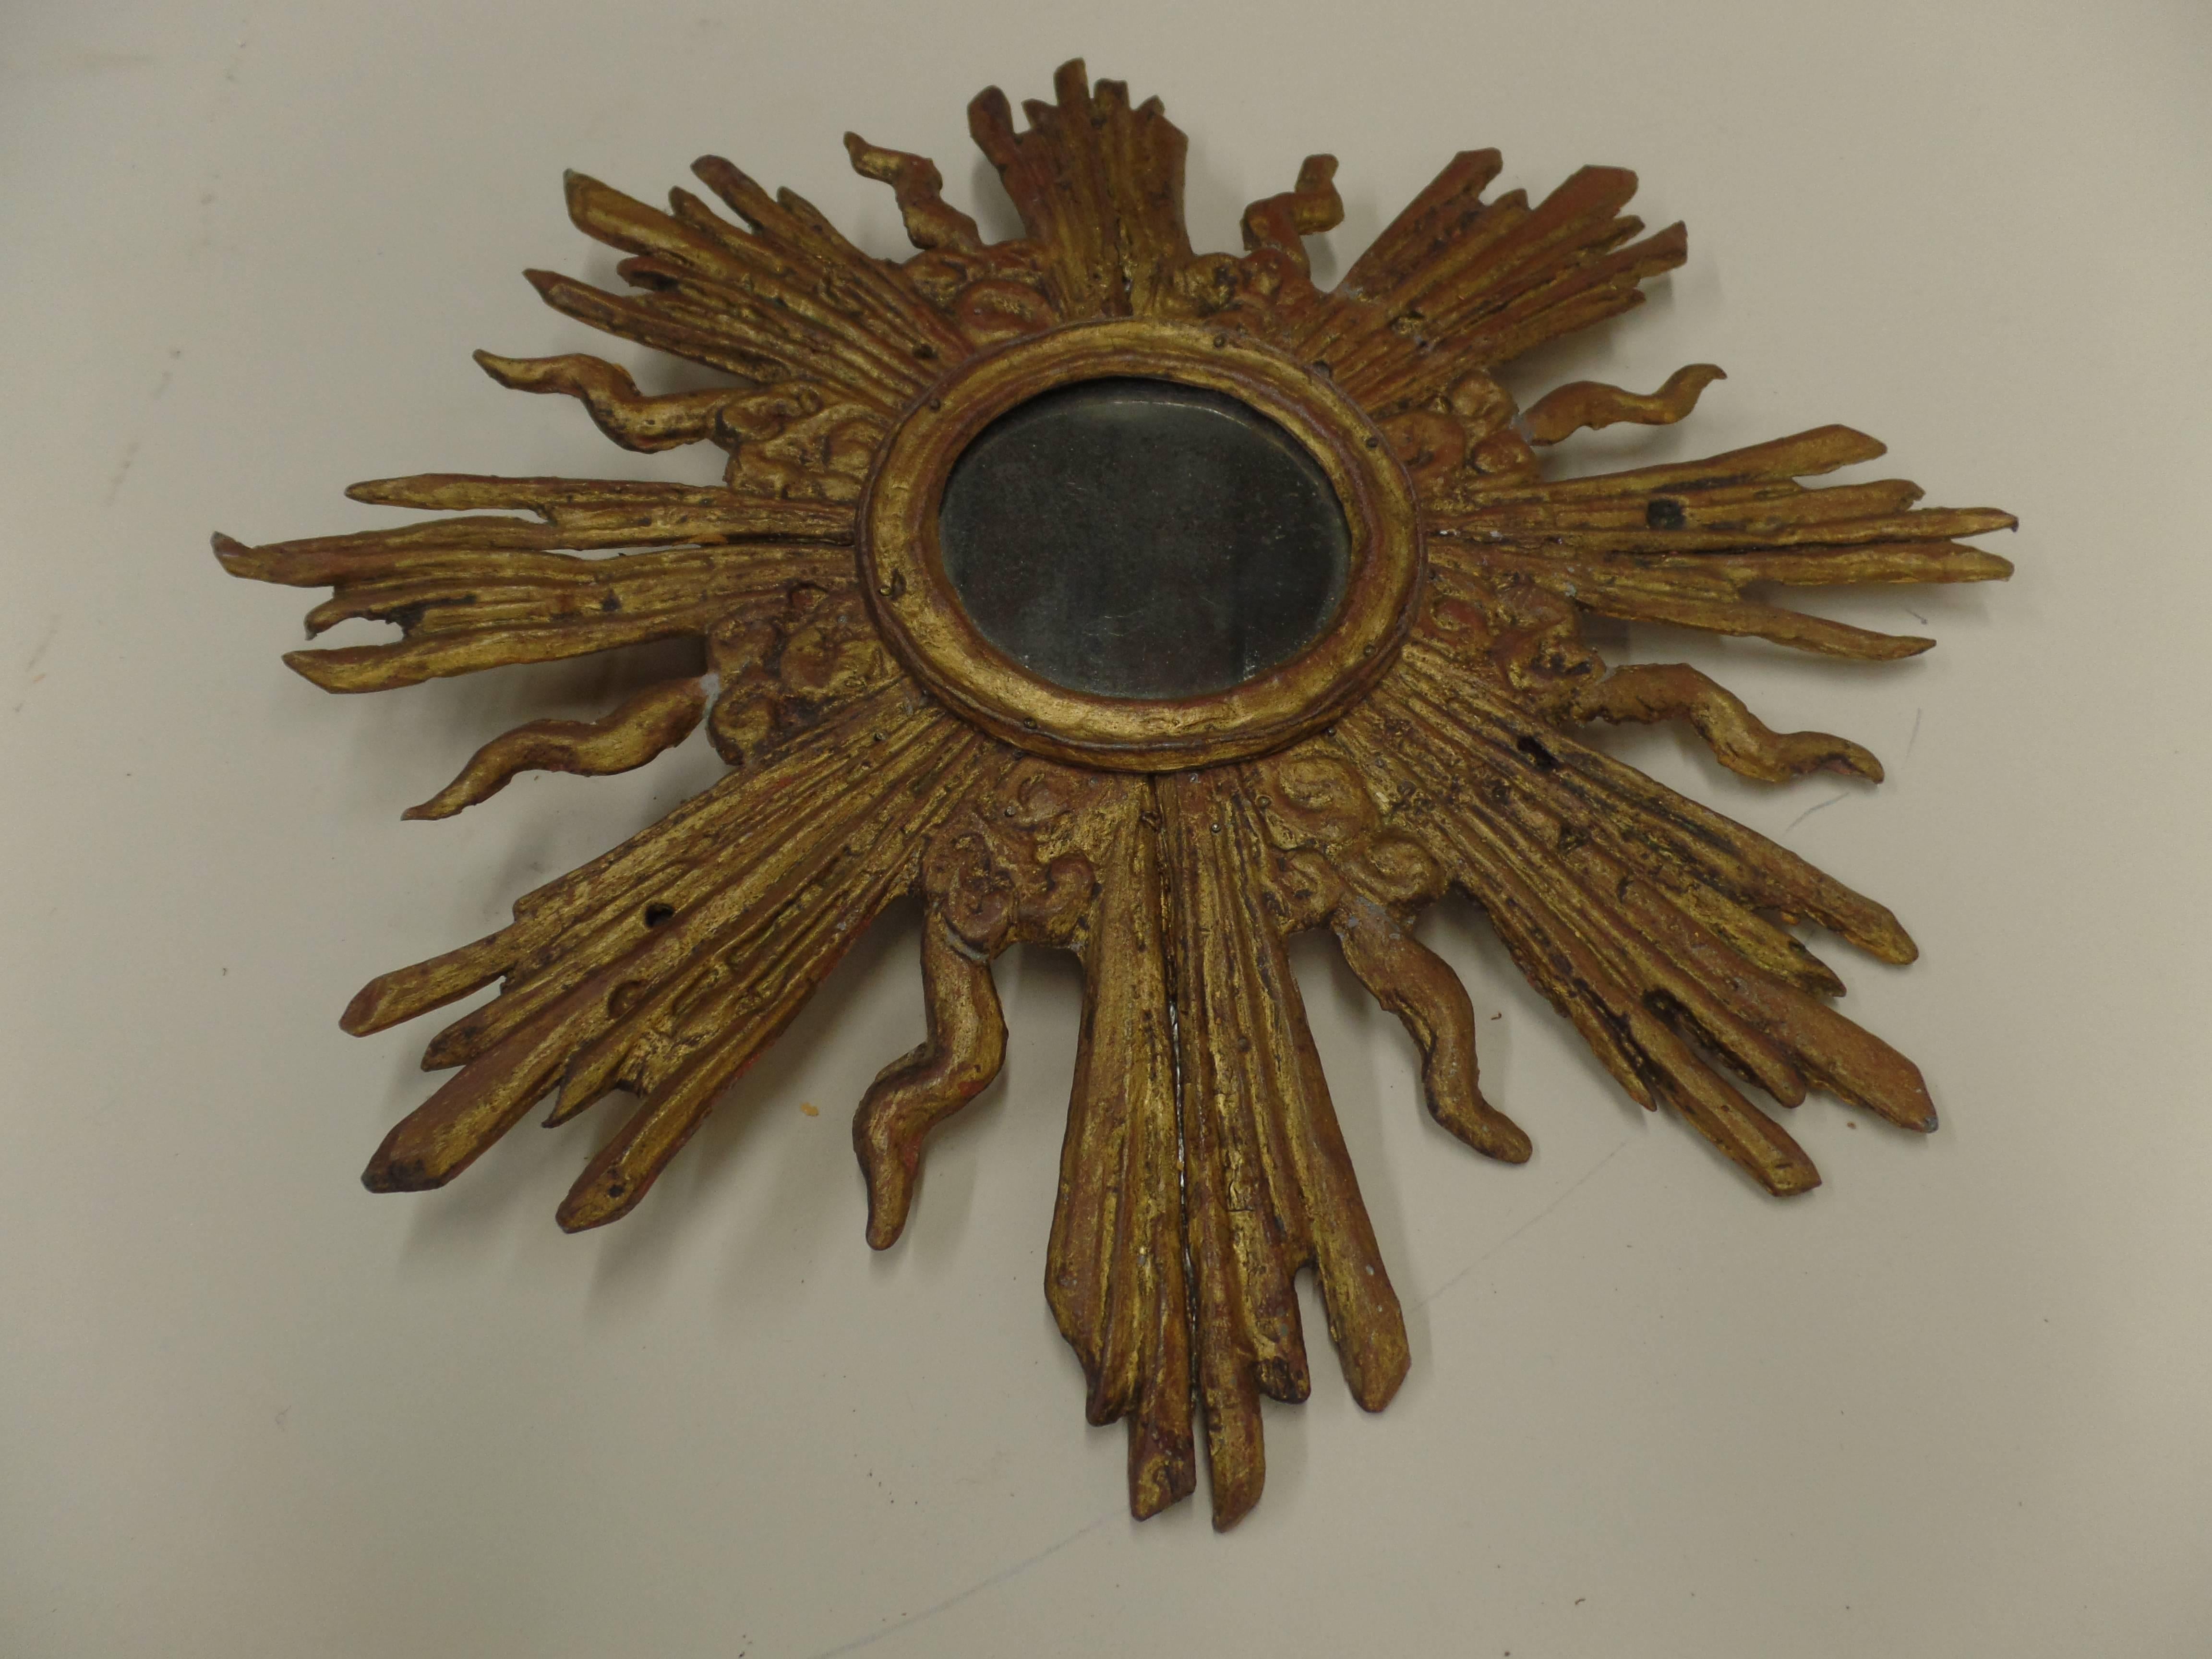 French Modern Neoclassical Gilt Lead Sunburst Mirror Attributed to Maison Jansen In Good Condition For Sale In New York, NY